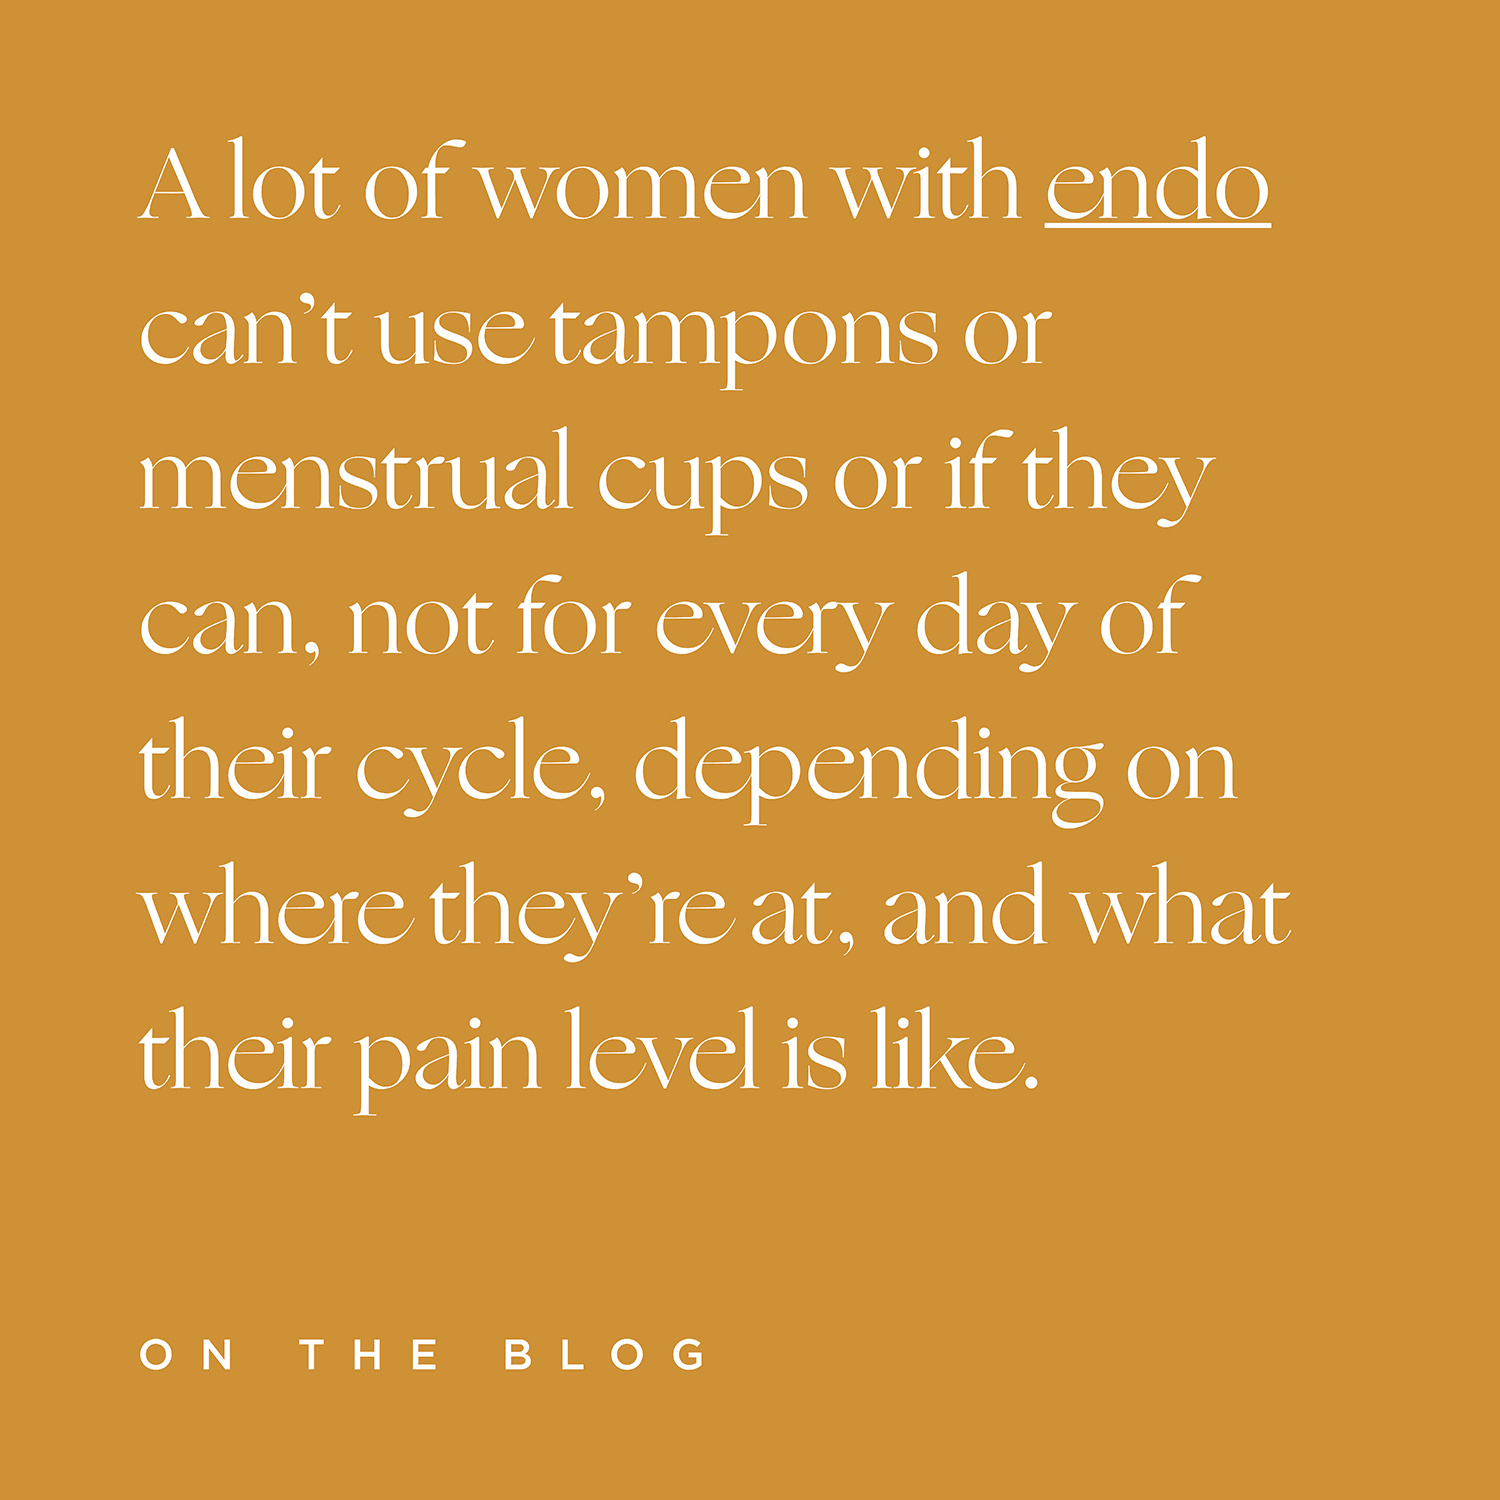 Endometriosis and the role of period underwear